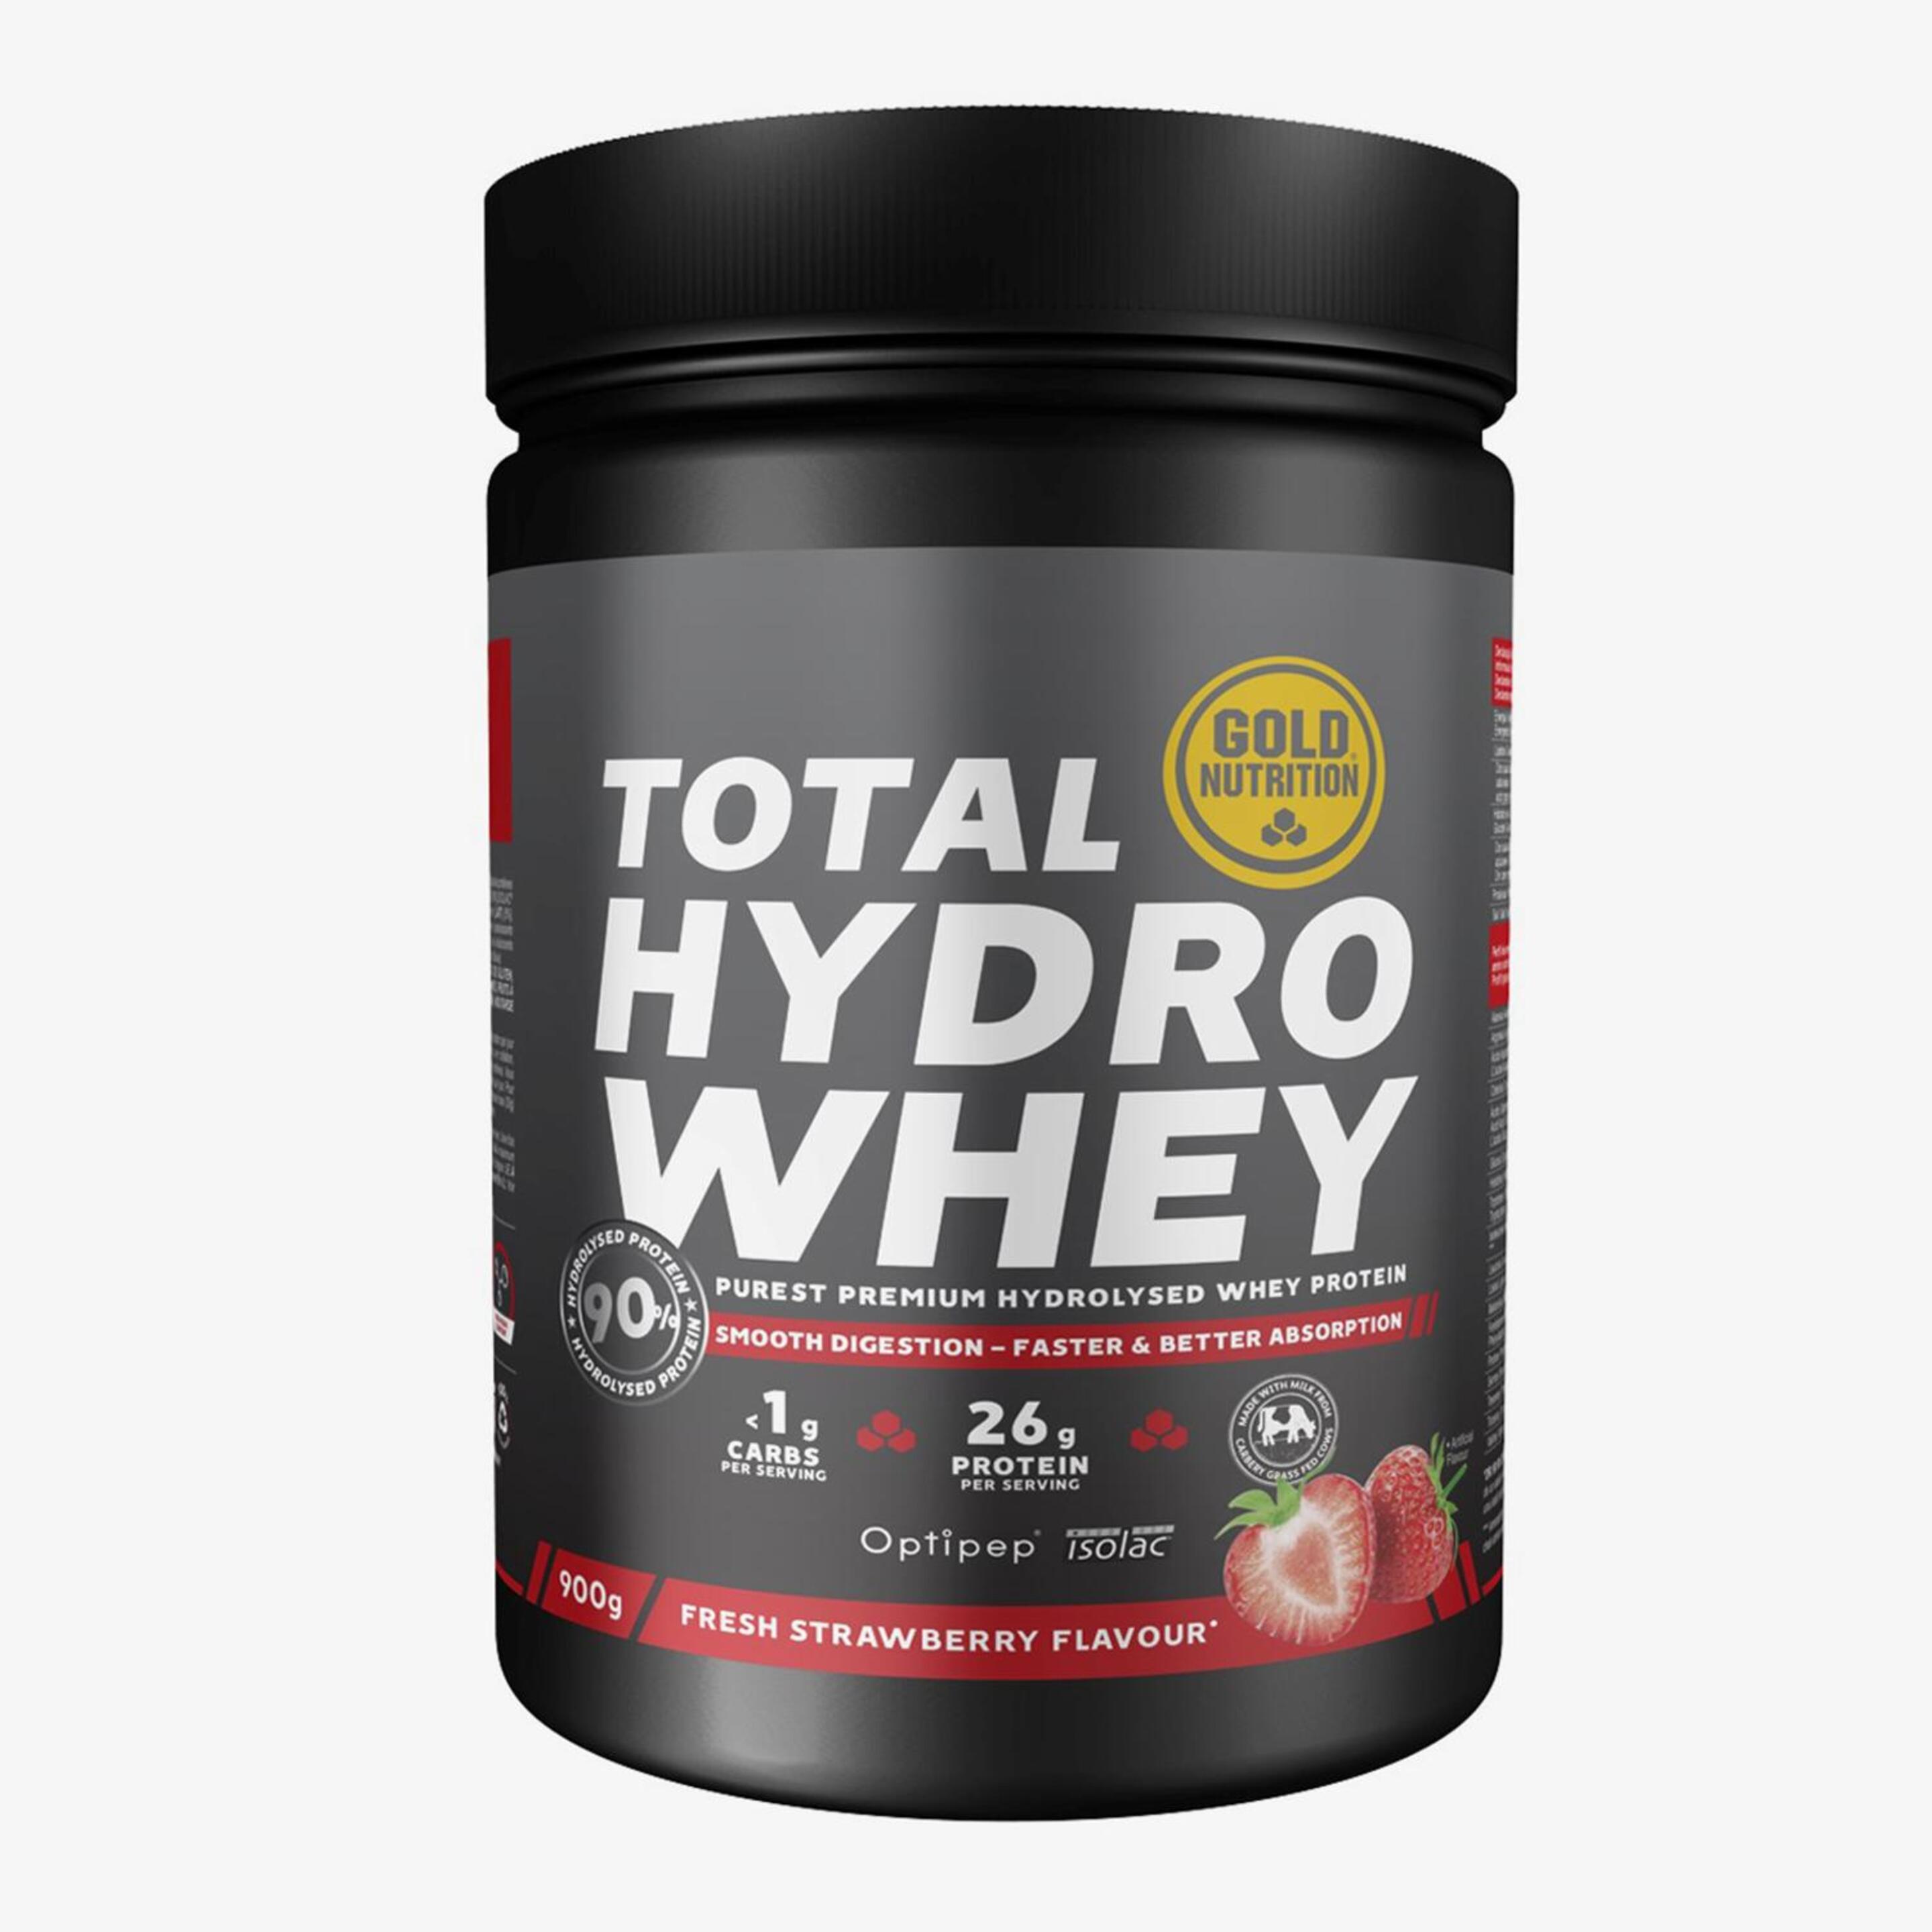 Gold Nutrition Total Hydro